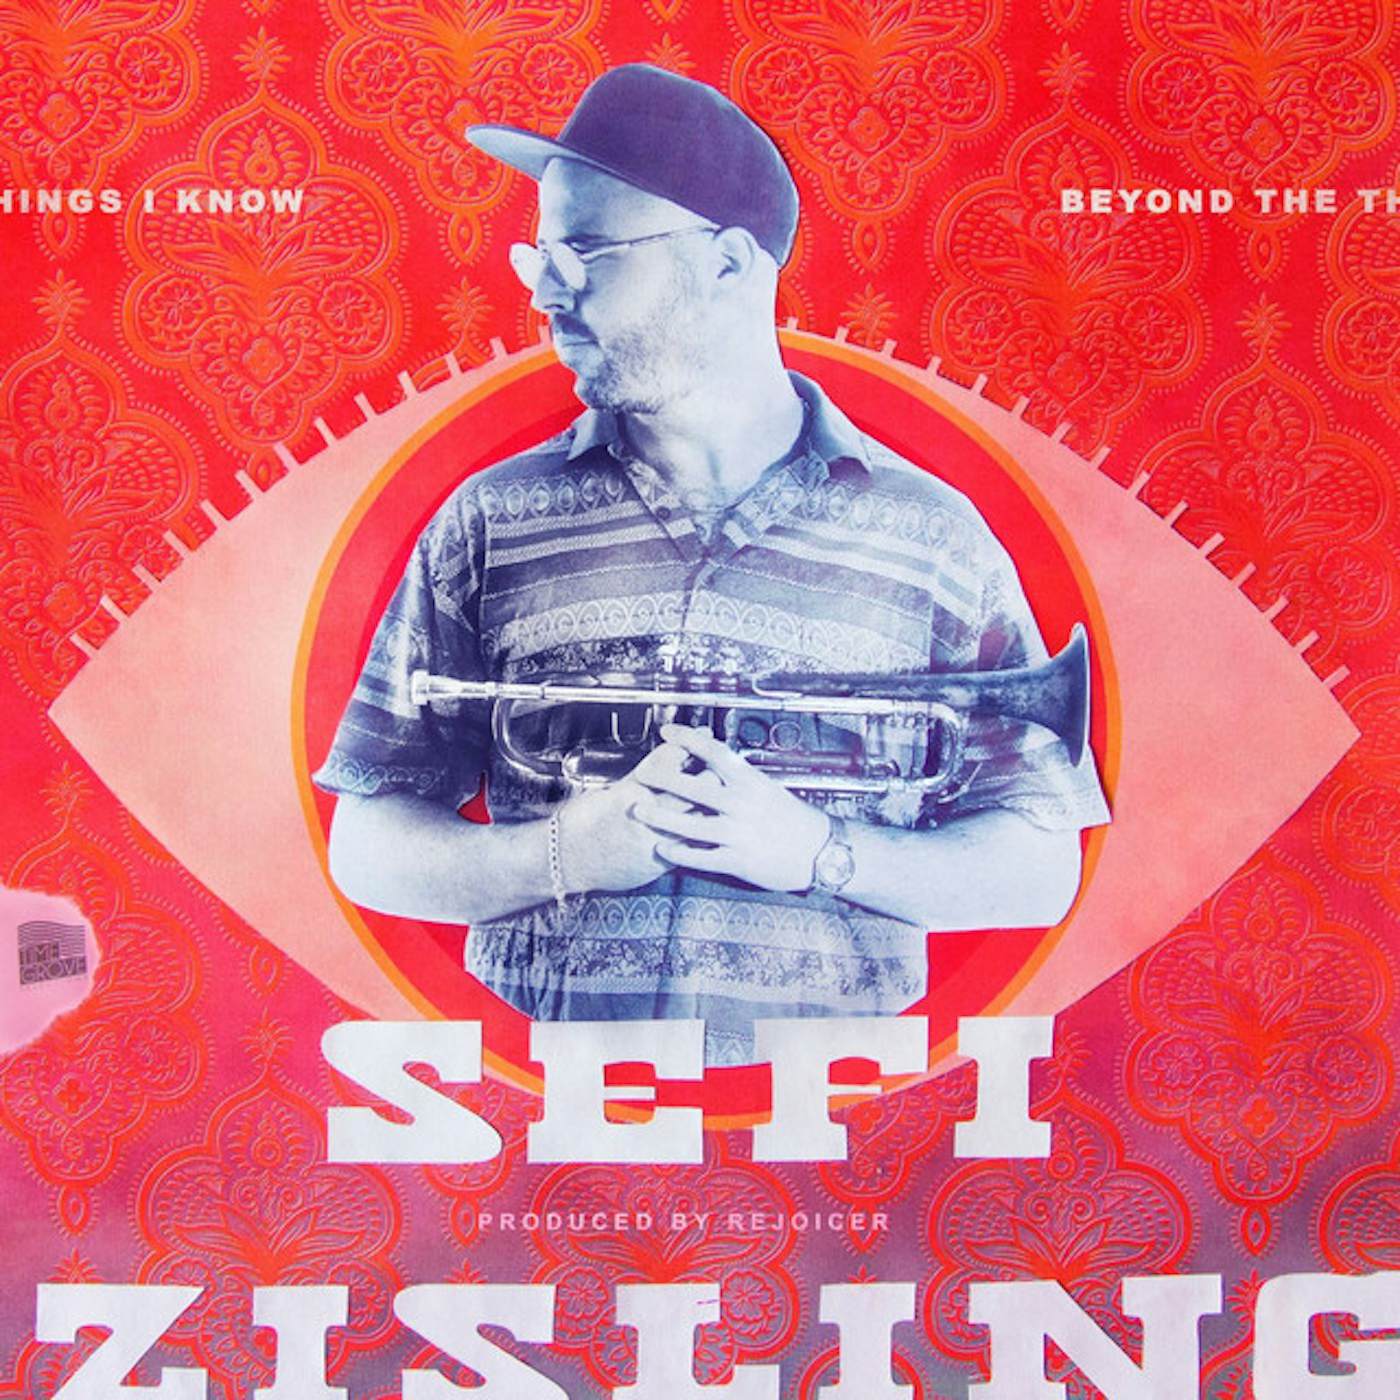 Sefi Zisling BEYOND THE THINGS I KNOW CD